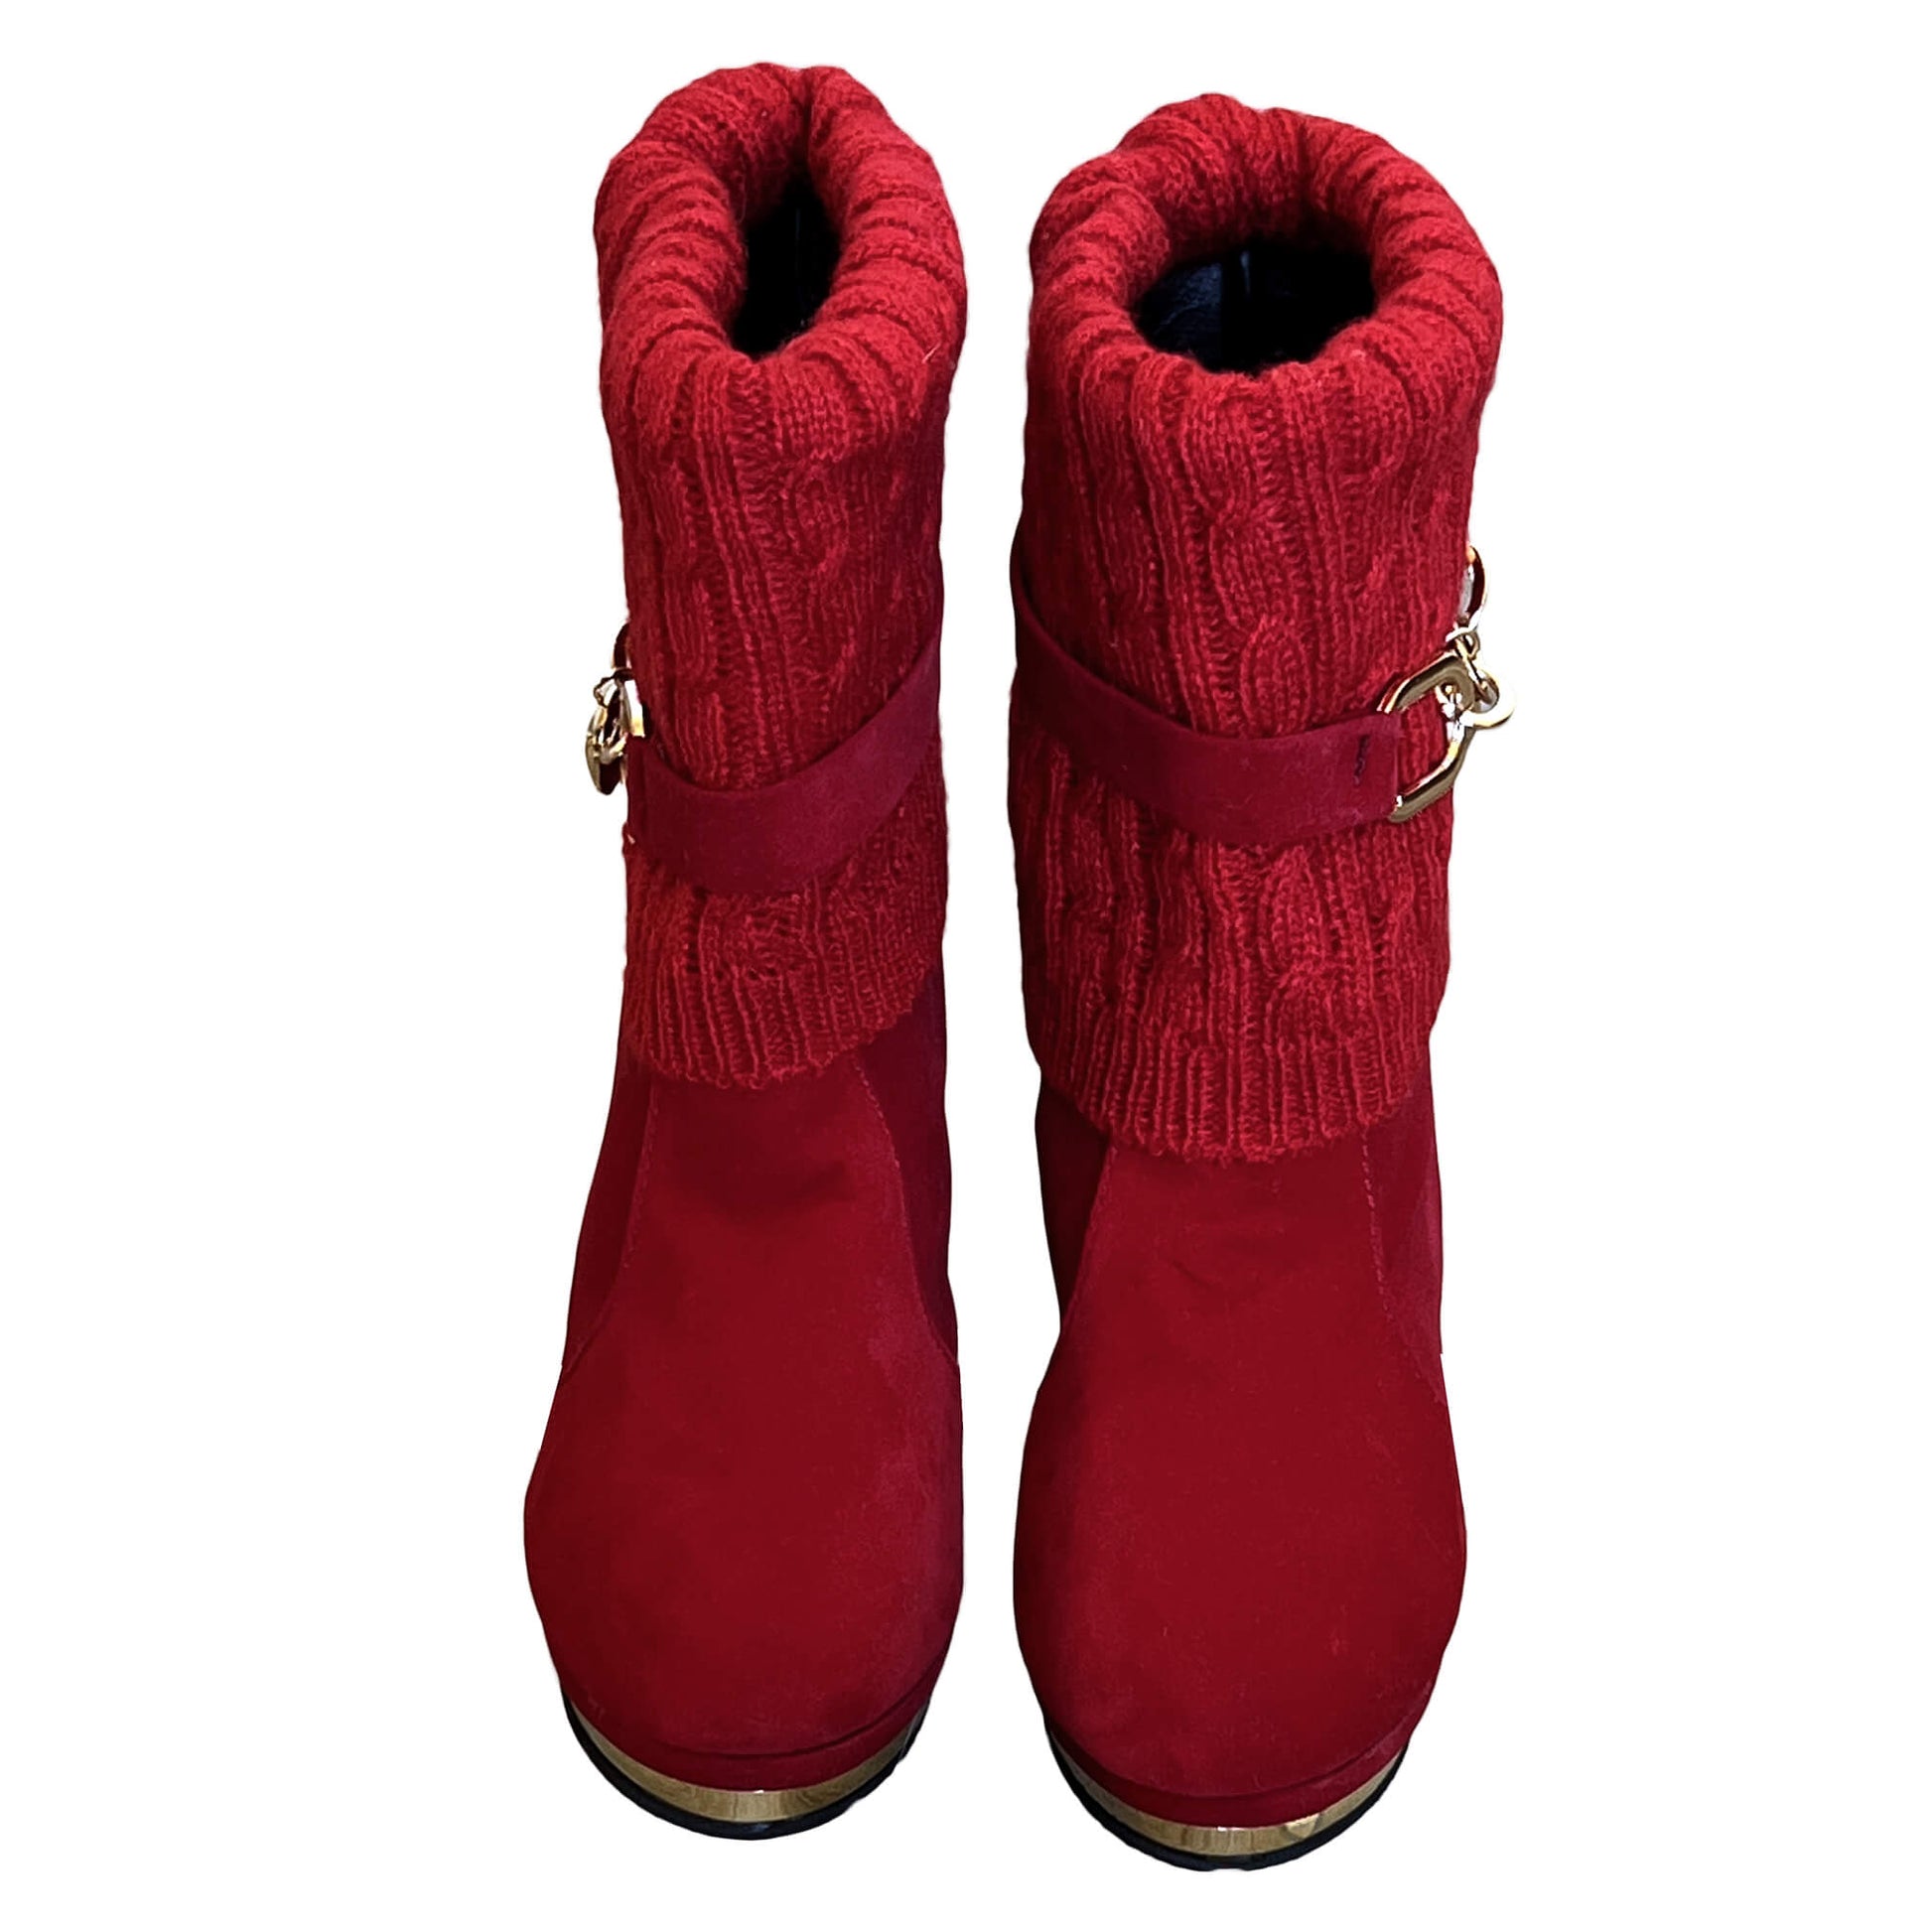 BBLAN red-Suede-High-Heel-Fashion-Booties.-Size-US-7.5;-EU-28.-Adjustable-knit-upper-can-be-raised. Shown-in-the-lowest-position.-Held-in-place-with-chain-strap,-with-logo.-Gold-accents-at-the-toe.-Gold-Heels.-Shop-eBargainsAndDeals.com.